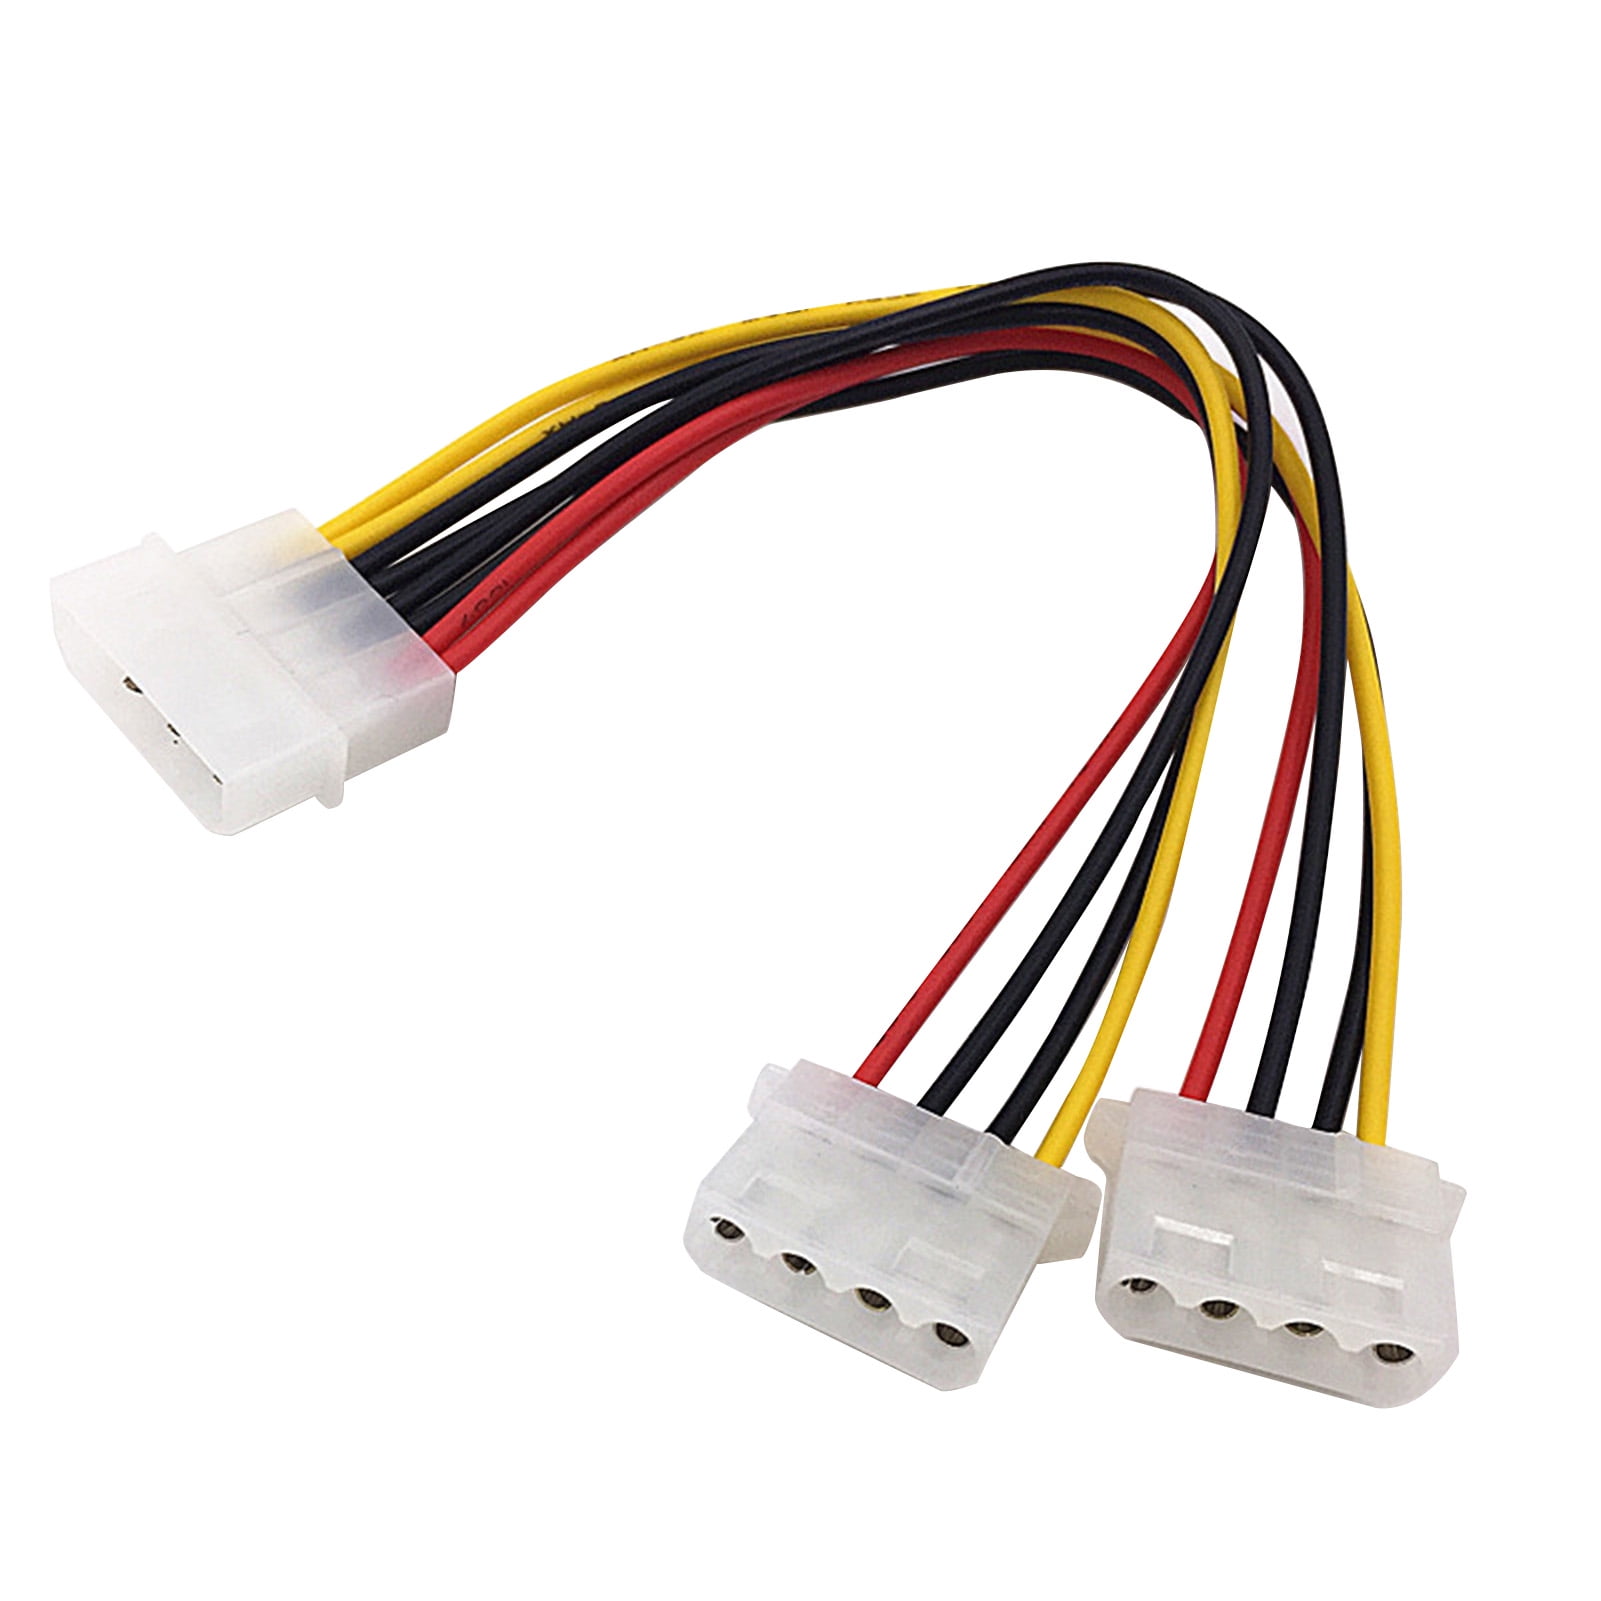 4 Pin IDE 1-to-3 Molex IDE Power Supply Y Splitter Exentsion Cable cord B4I7 